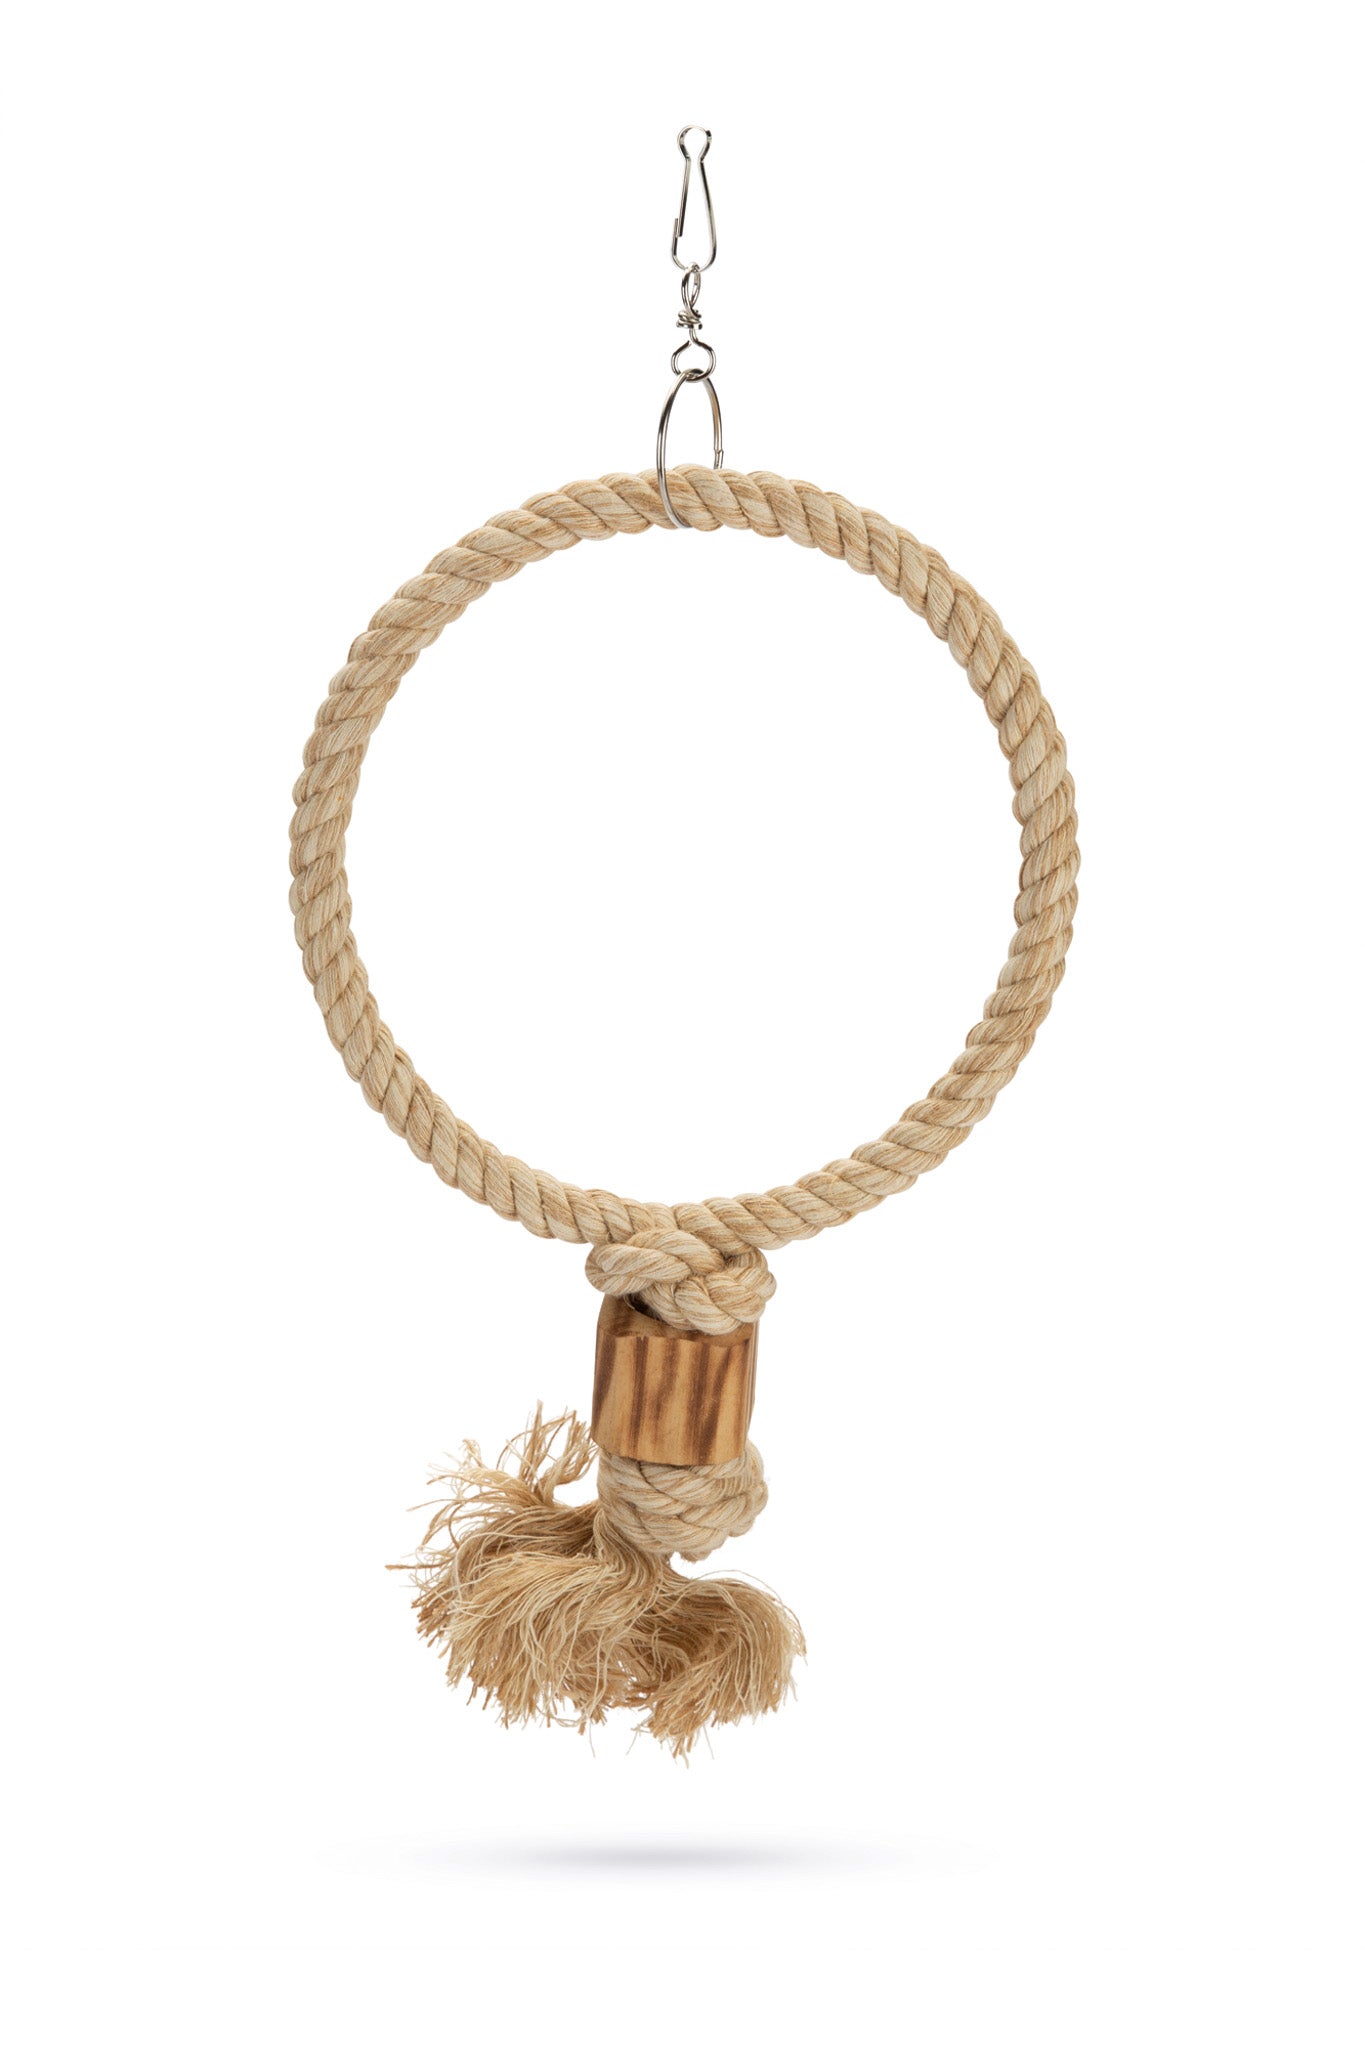 Wooden Bird Toy Ringy